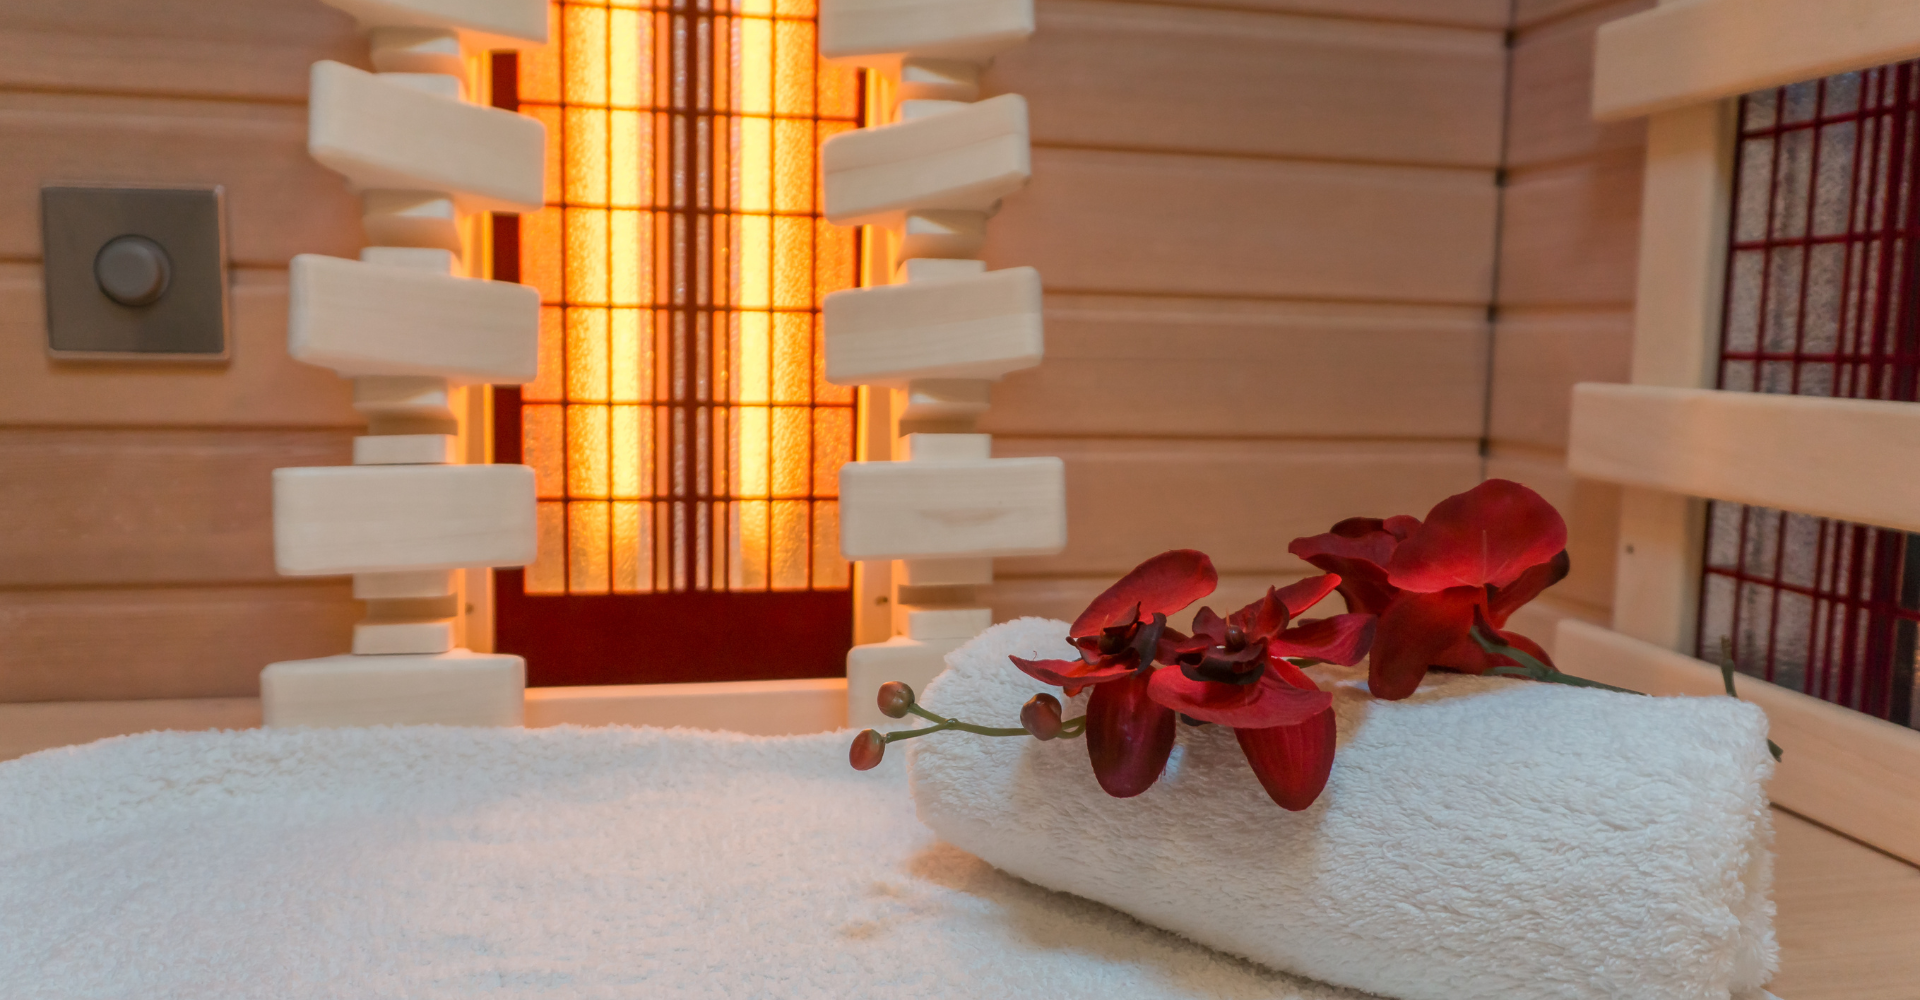 Cost and Value of Infrared Sauna: What is the Cost of Infrared Sauna?